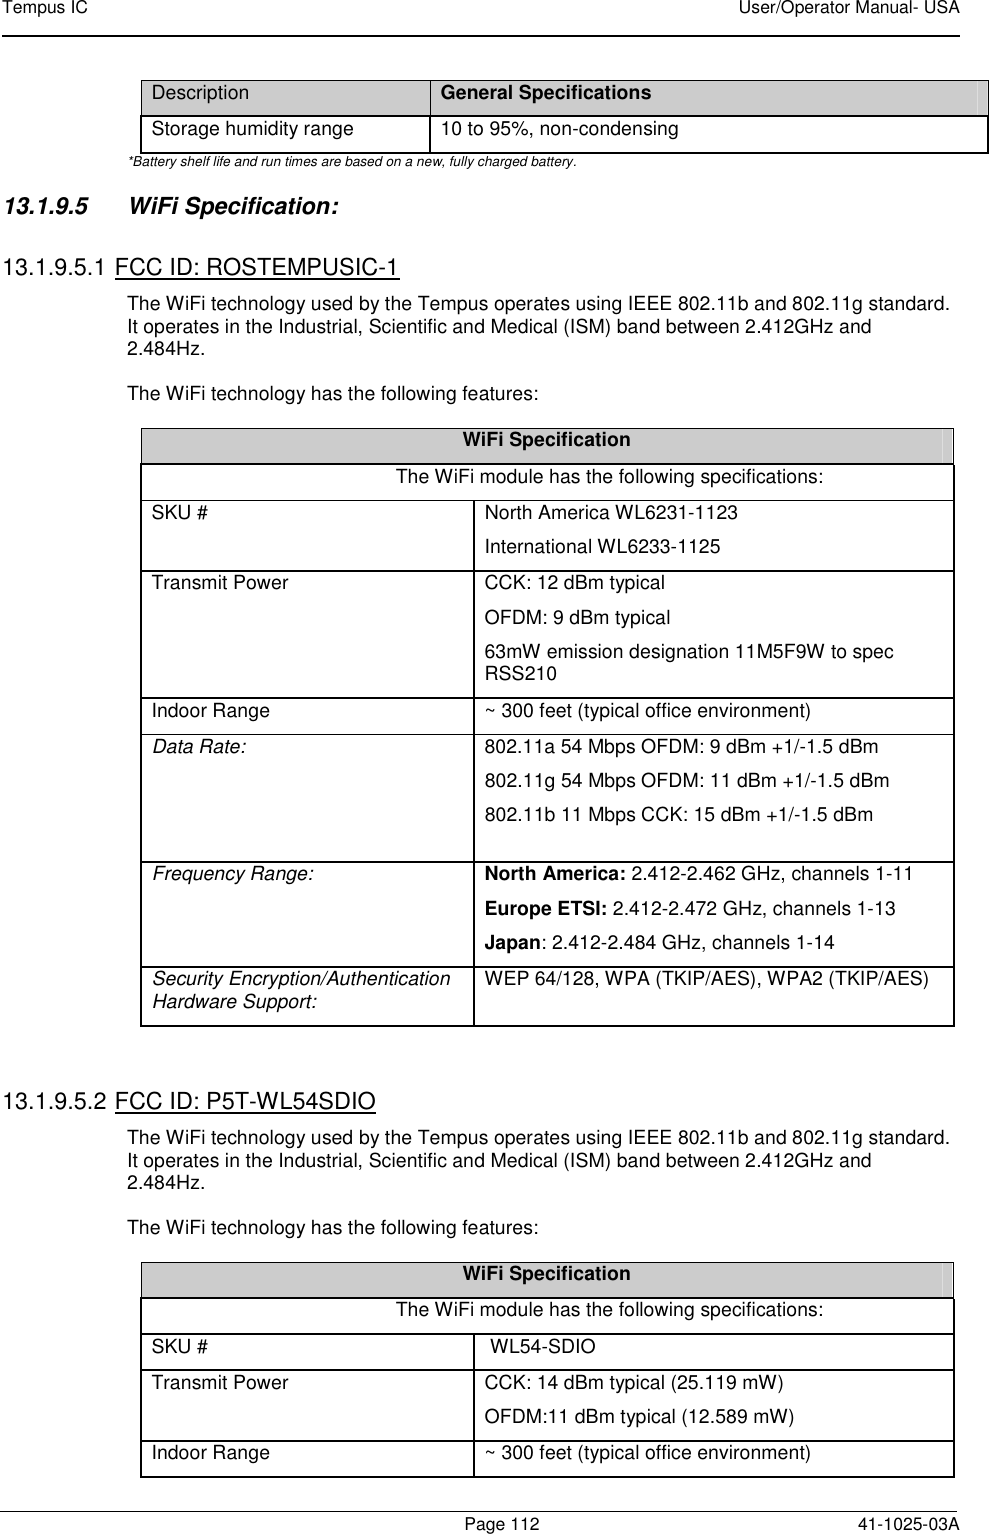 Tempus IC    User/Operator Manual- USA        Page 112   41-1025-03A Description General Specifications Storage humidity range  10 to 95%, non-condensing *Battery shelf life and run times are based on a new, fully charged battery. 13.1.9.5  WiFi Specification:   13.1.9.5.1 FCC ID: ROSTEMPUSIC-1 The WiFi technology used by the Tempus operates using IEEE 802.11b and 802.11g standard.  It operates in the Industrial, Scientific and Medical (ISM) band between 2.412GHz and 2.484Hz.   The WiFi technology has the following features:  WiFi Specification The WiFi module has the following specifications:  SKU #   North America WL6231-1123  International WL6233-1125 Transmit Power   CCK: 12 dBm typical  OFDM: 9 dBm typical  63mW emission designation 11M5F9W to spec RSS210  Indoor Range   ~ 300 feet (typical office environment)  Data Rate:   802.11a 54 Mbps OFDM: 9 dBm +1/-1.5 dBm 802.11g 54 Mbps OFDM: 11 dBm +1/-1.5 dBm 802.11b 11 Mbps CCK: 15 dBm +1/-1.5 dBm Frequency Range:  North America: 2.412-2.462 GHz, channels 1-11  Europe ETSI: 2.412-2.472 GHz, channels 1-13  Japan: 2.412-2.484 GHz, channels 1-14  Security Encryption/Authentication Hardware Support:  WEP 64/128, WPA (TKIP/AES), WPA2 (TKIP/AES)   13.1.9.5.2 FCC ID: P5T-WL54SDIO The WiFi technology used by the Tempus operates using IEEE 802.11b and 802.11g standard.  It operates in the Industrial, Scientific and Medical (ISM) band between 2.412GHz and 2.484Hz.   The WiFi technology has the following features:  WiFi Specification The WiFi module has the following specifications:  SKU #    WL54-SDIO Transmit Power   CCK: 14 dBm typical (25.119 mW)  OFDM:11 dBm typical (12.589 mW)  Indoor Range   ~ 300 feet (typical office environment)  